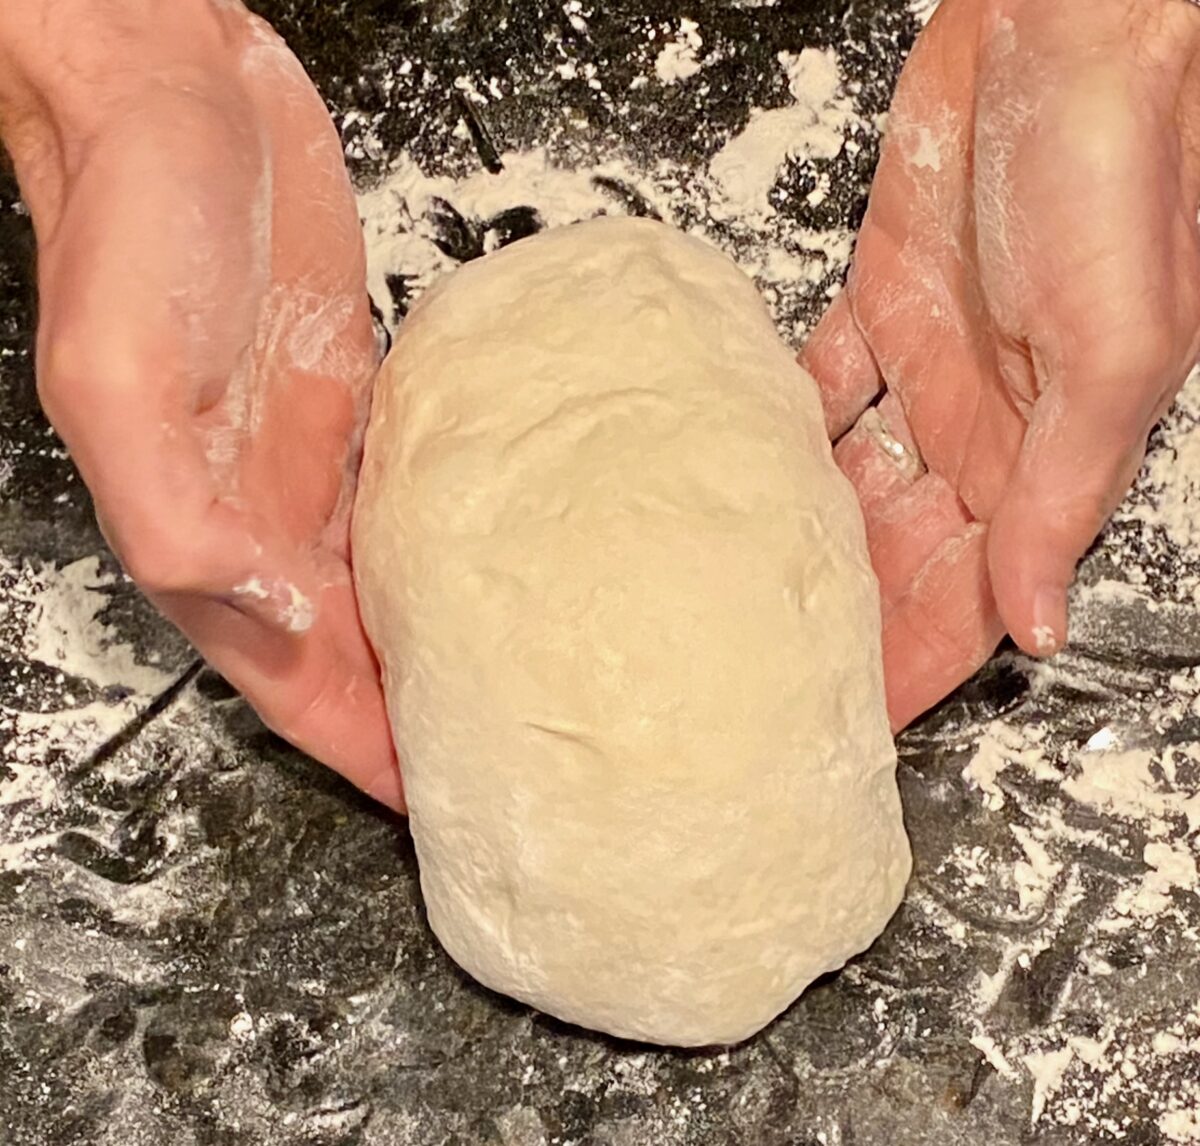 Here, we're trying to shape and tighten the dough ball. We're gently pressing the dough in and down, which stretches the dough across the top. 